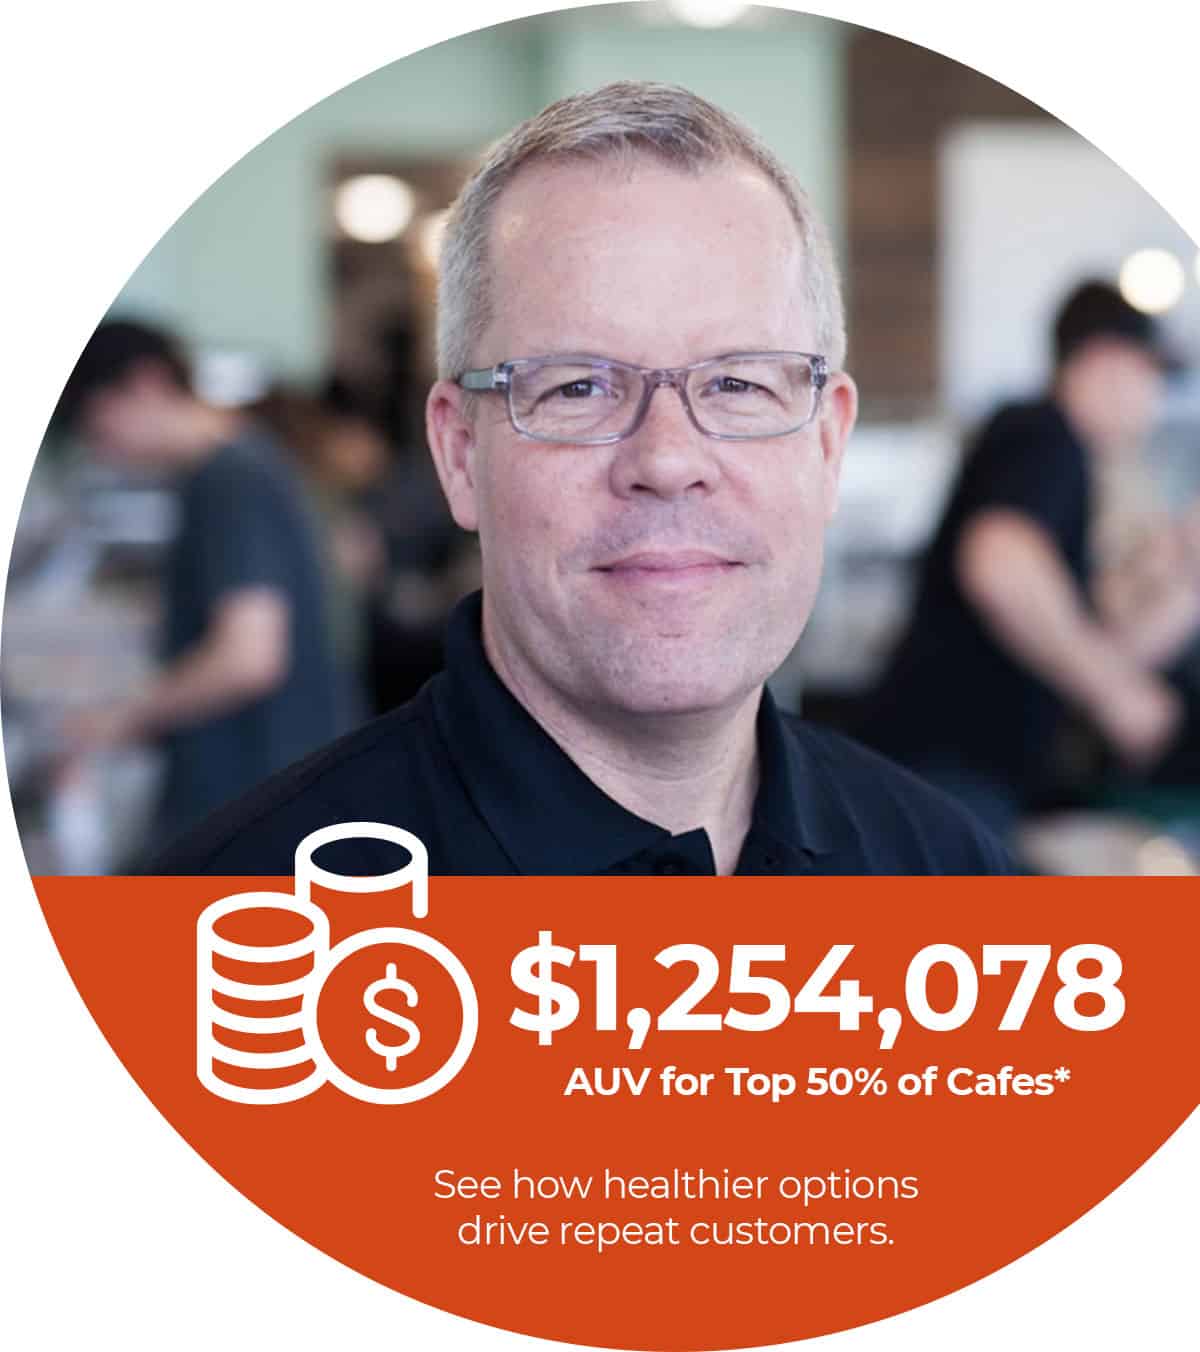 $1,254,078 AUV for Top 50% of Cafes* - See how healthier options drive repeat customers.